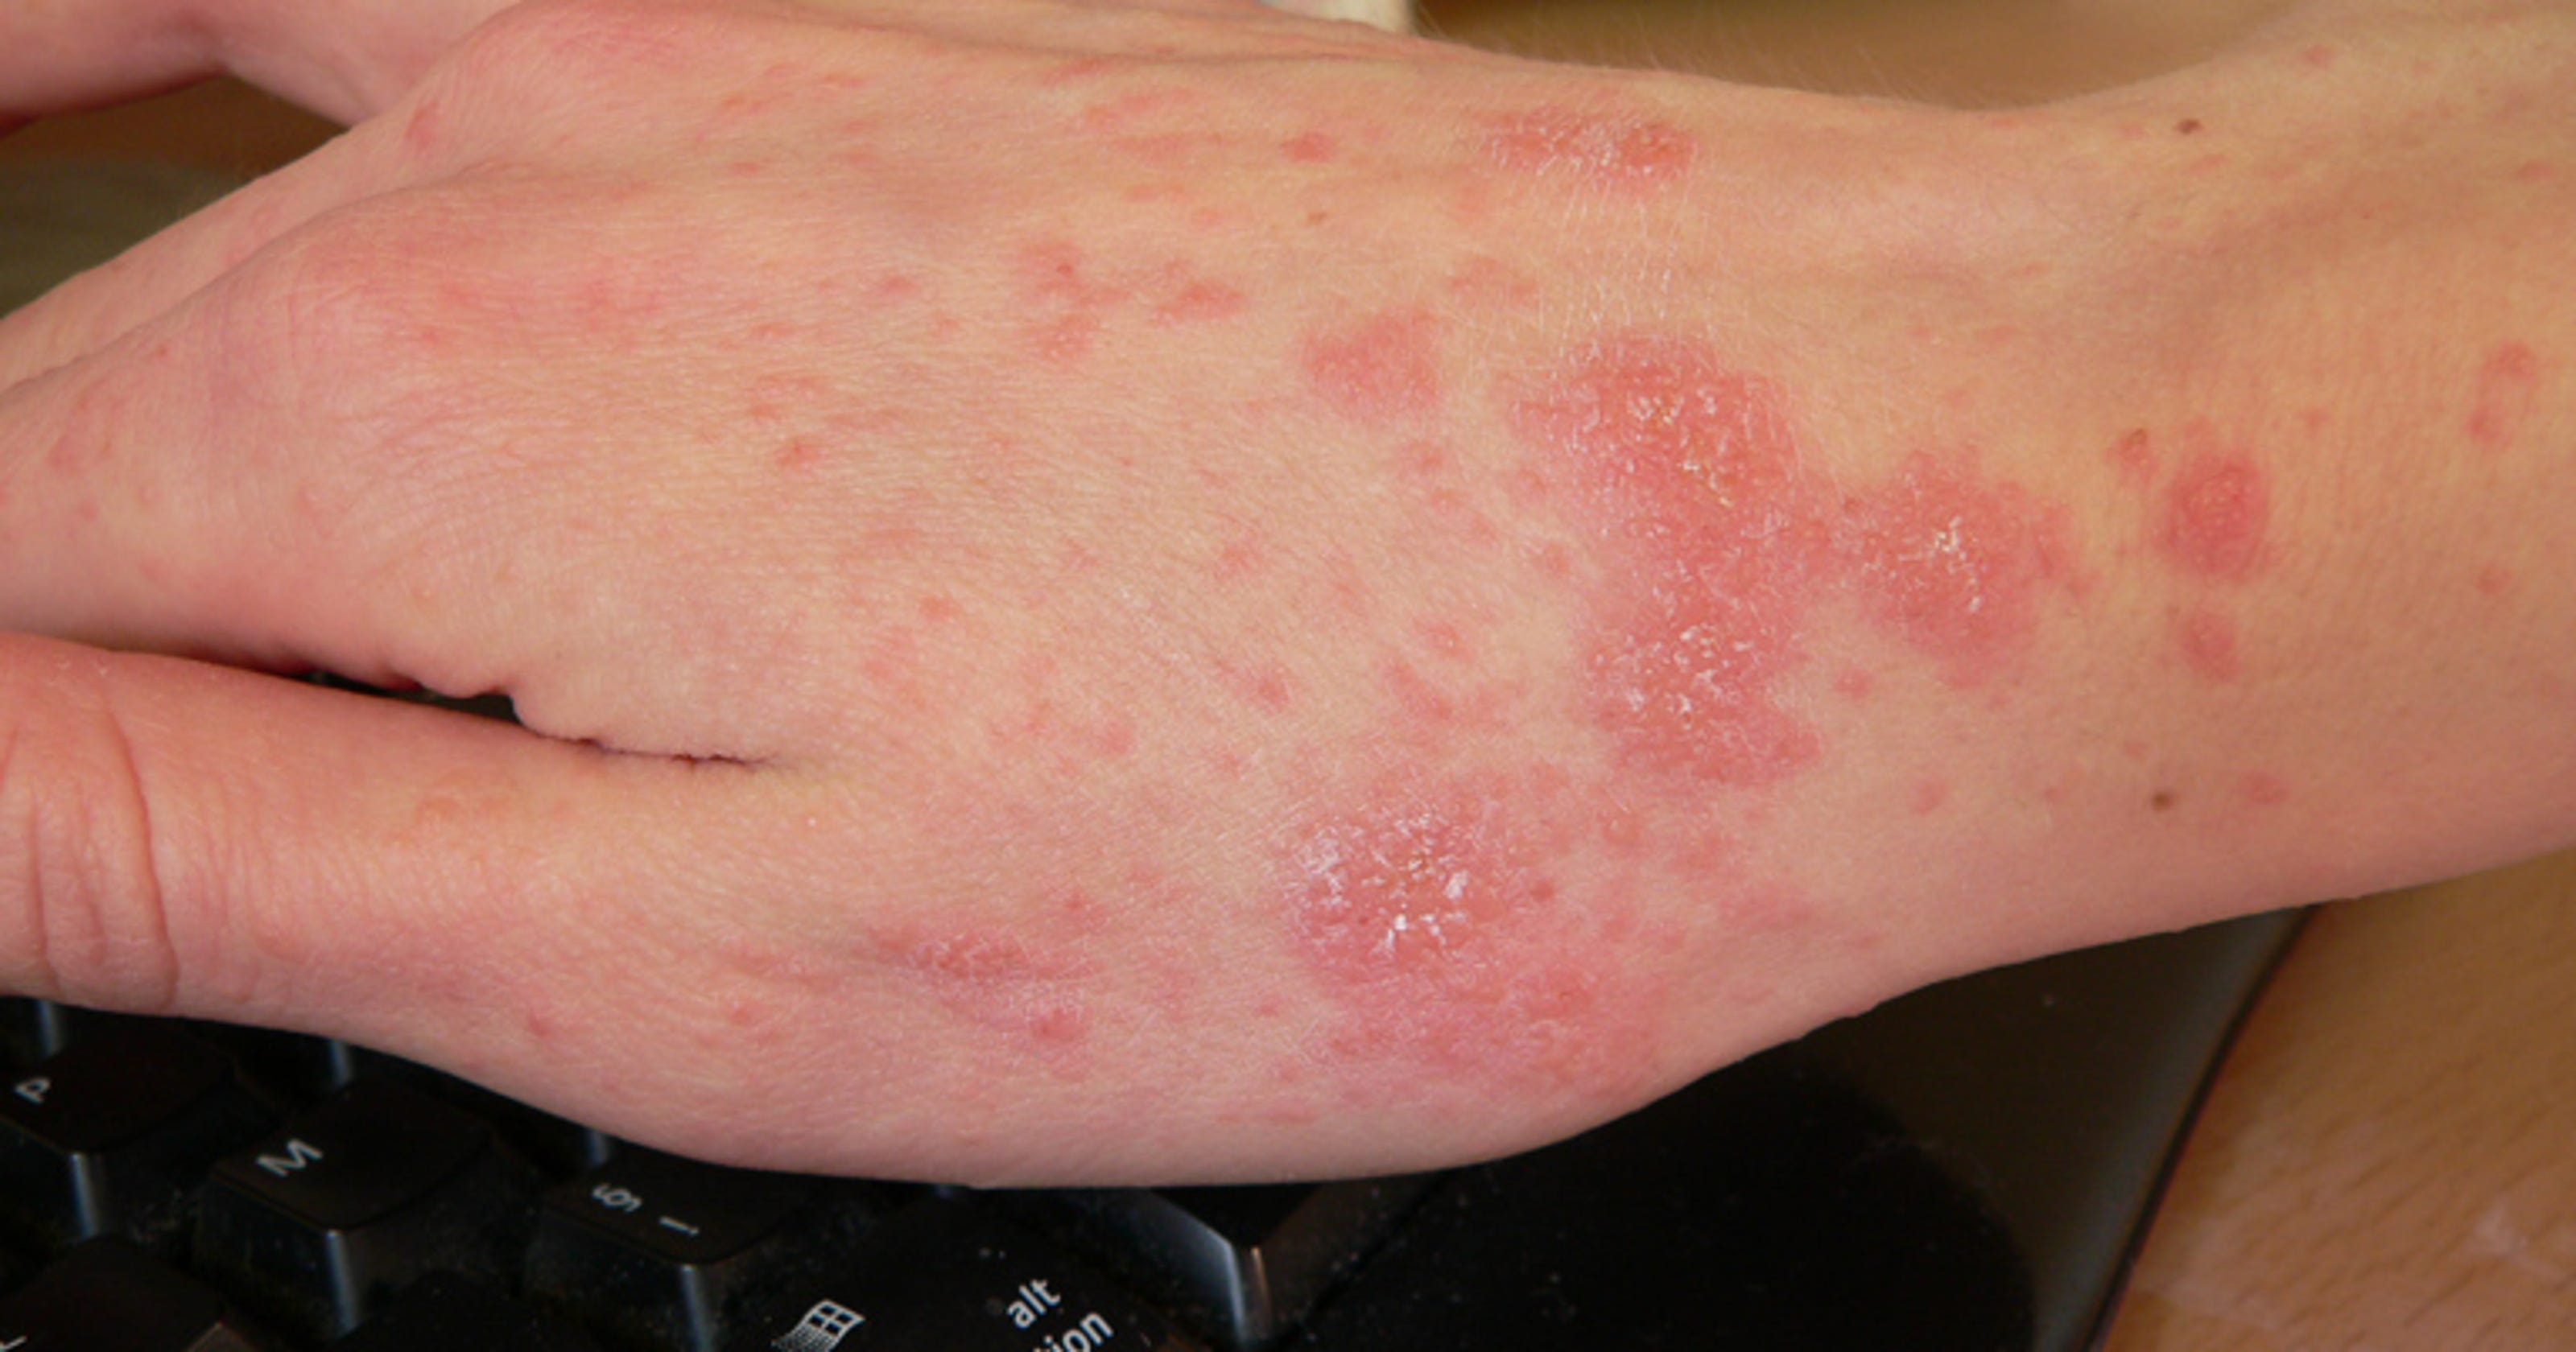 asheville-nursing-home-residents-staff-treated-for-scabies